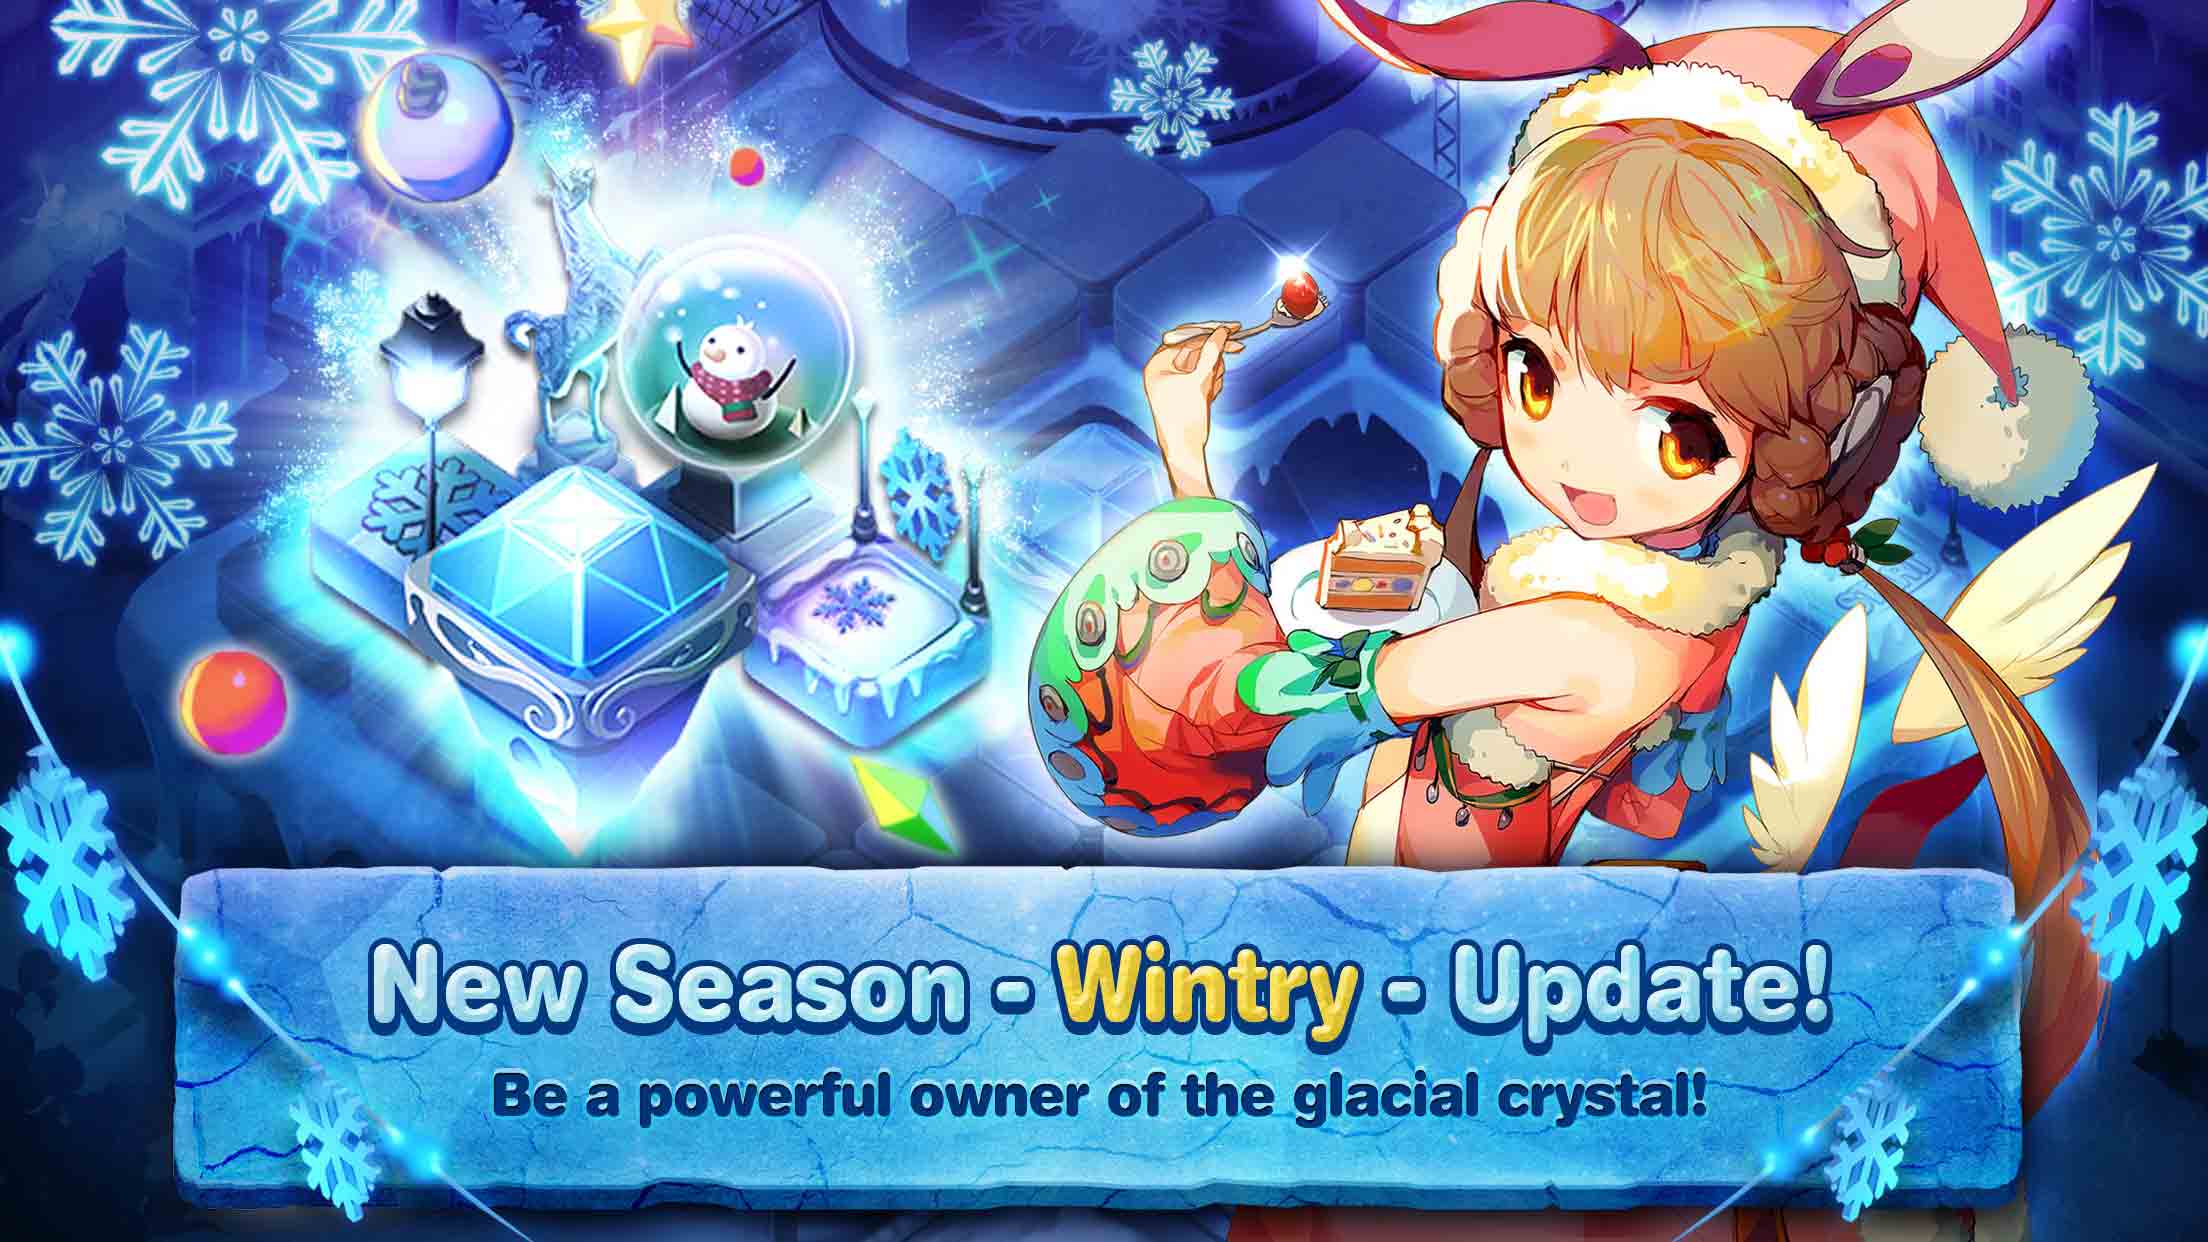 Christmas Has Come Early, Thanks to Game of Dice’s Brand New Winter Update